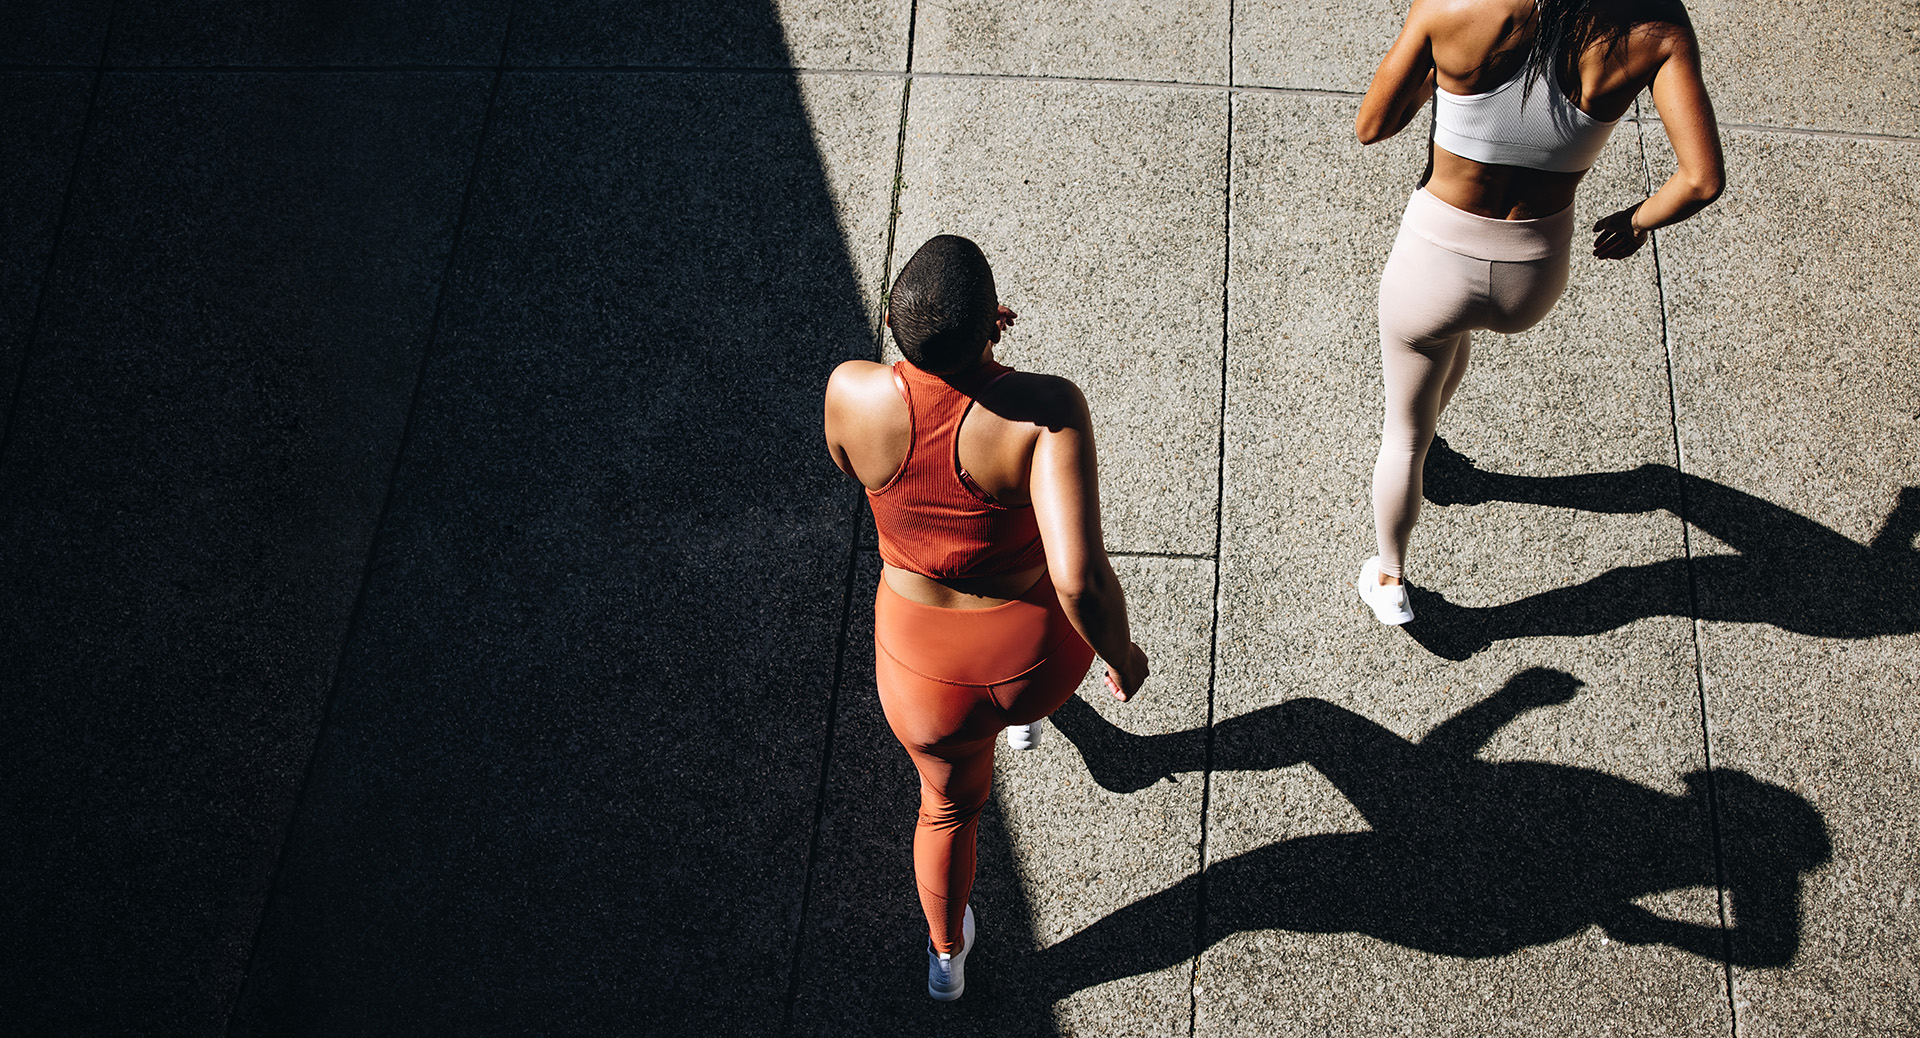 Top view of a two women in running attire jogging together. Female friends working out together in morning.